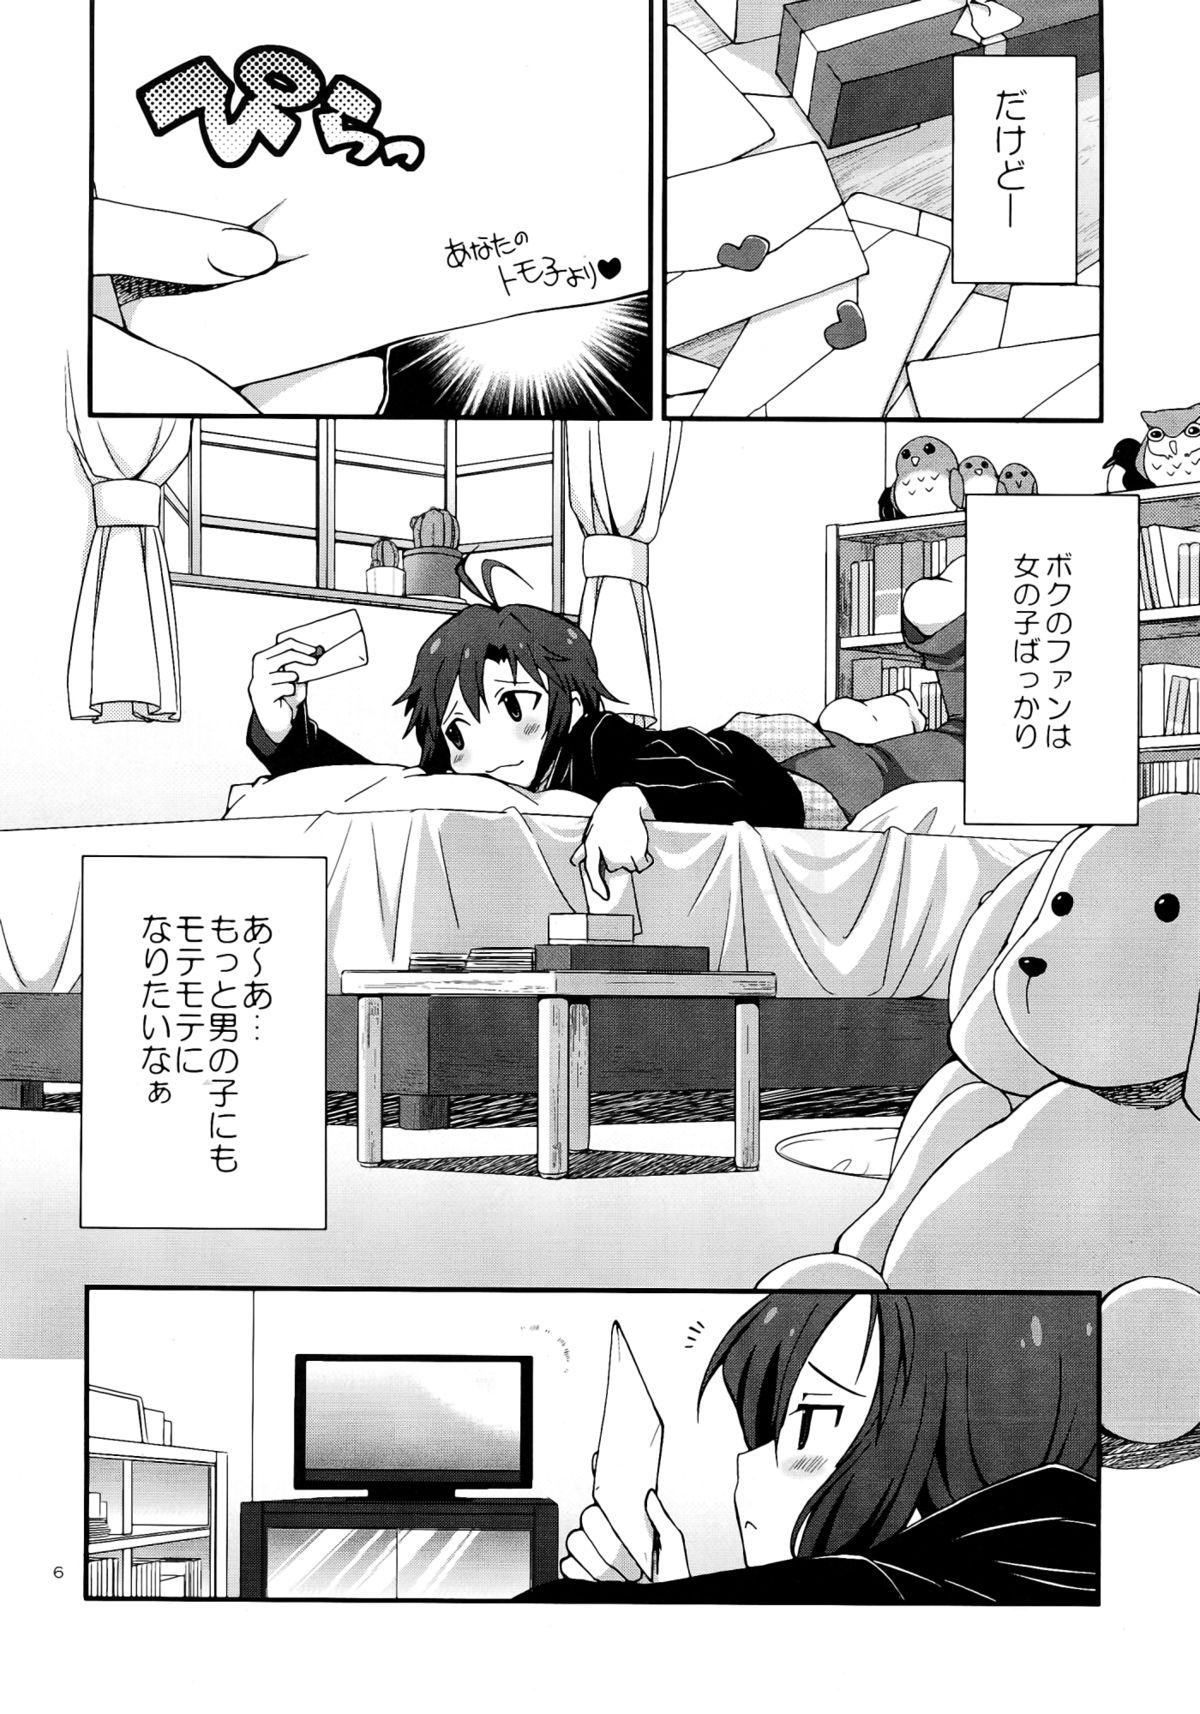 Phat THE iDOLM@STER MOHAERU - The idolmaster Trio - Page 6